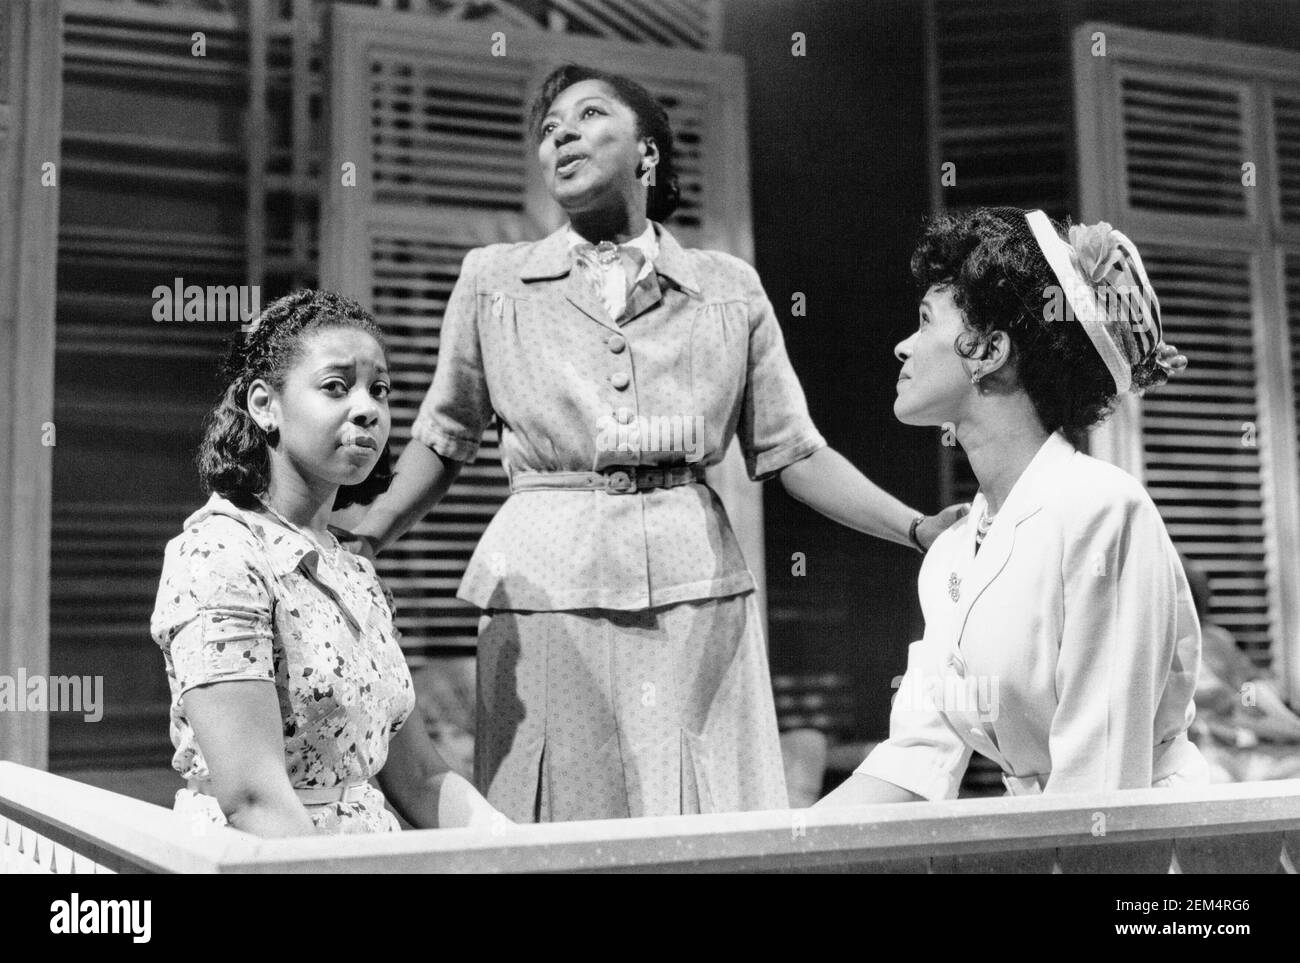 l-r: Joan-Ann Maynard (Olga), Joanne Campbell (Irene), Pauline Black (Marsha) in TRINIDAD SISTERS by Mustapha Matura at the Donmar Warehouse, London WC2  11/02/1988  a Tricycle Theatre production  design: Poppy Mitchell  lighting: David Colmer  director: Nicolas Kent Stock Photo